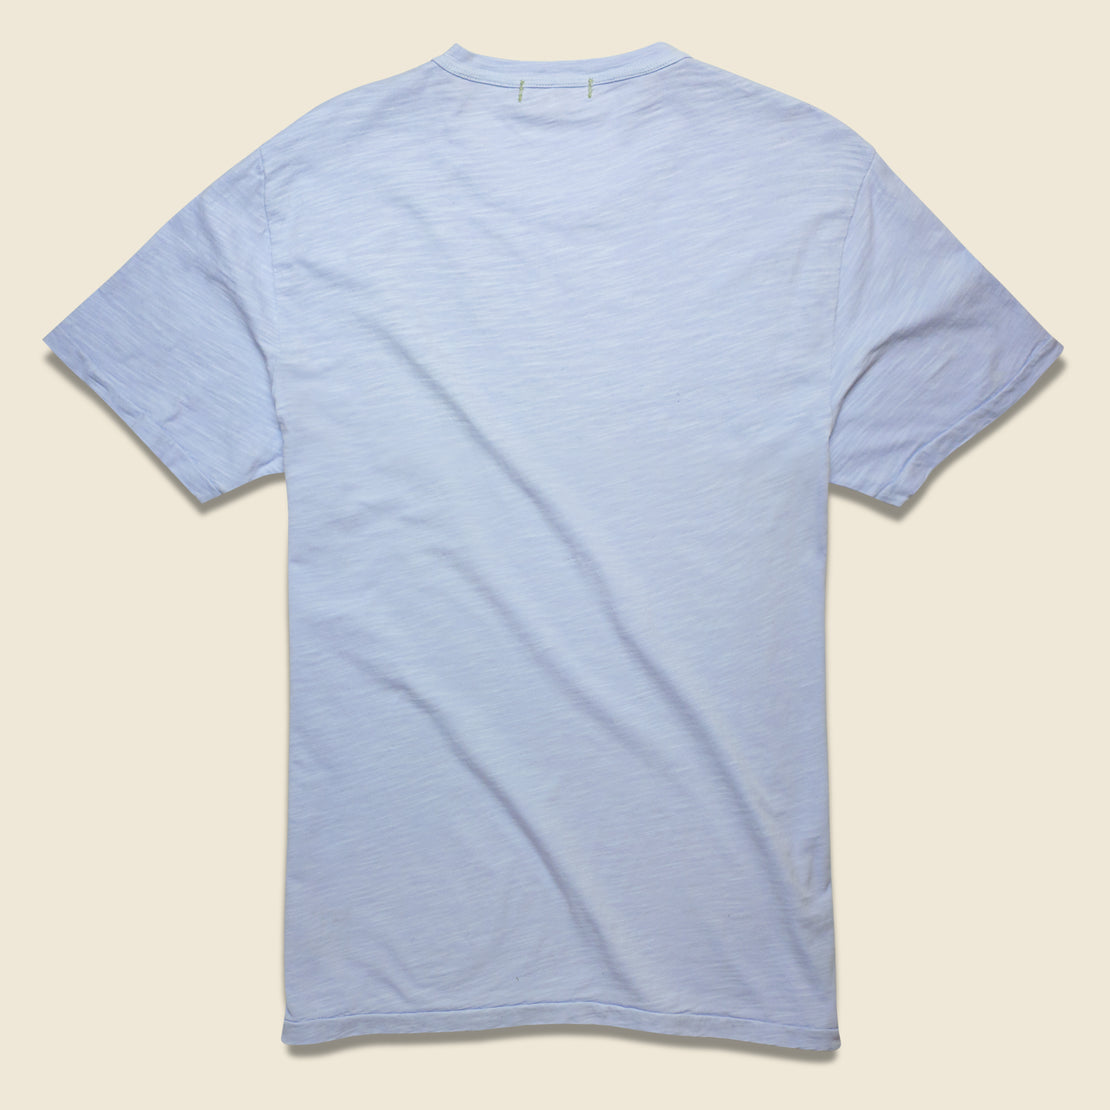 New Standard Crew Tee - Calm Blue - Alex Mill - STAG Provisions - Tops - S/S Tee